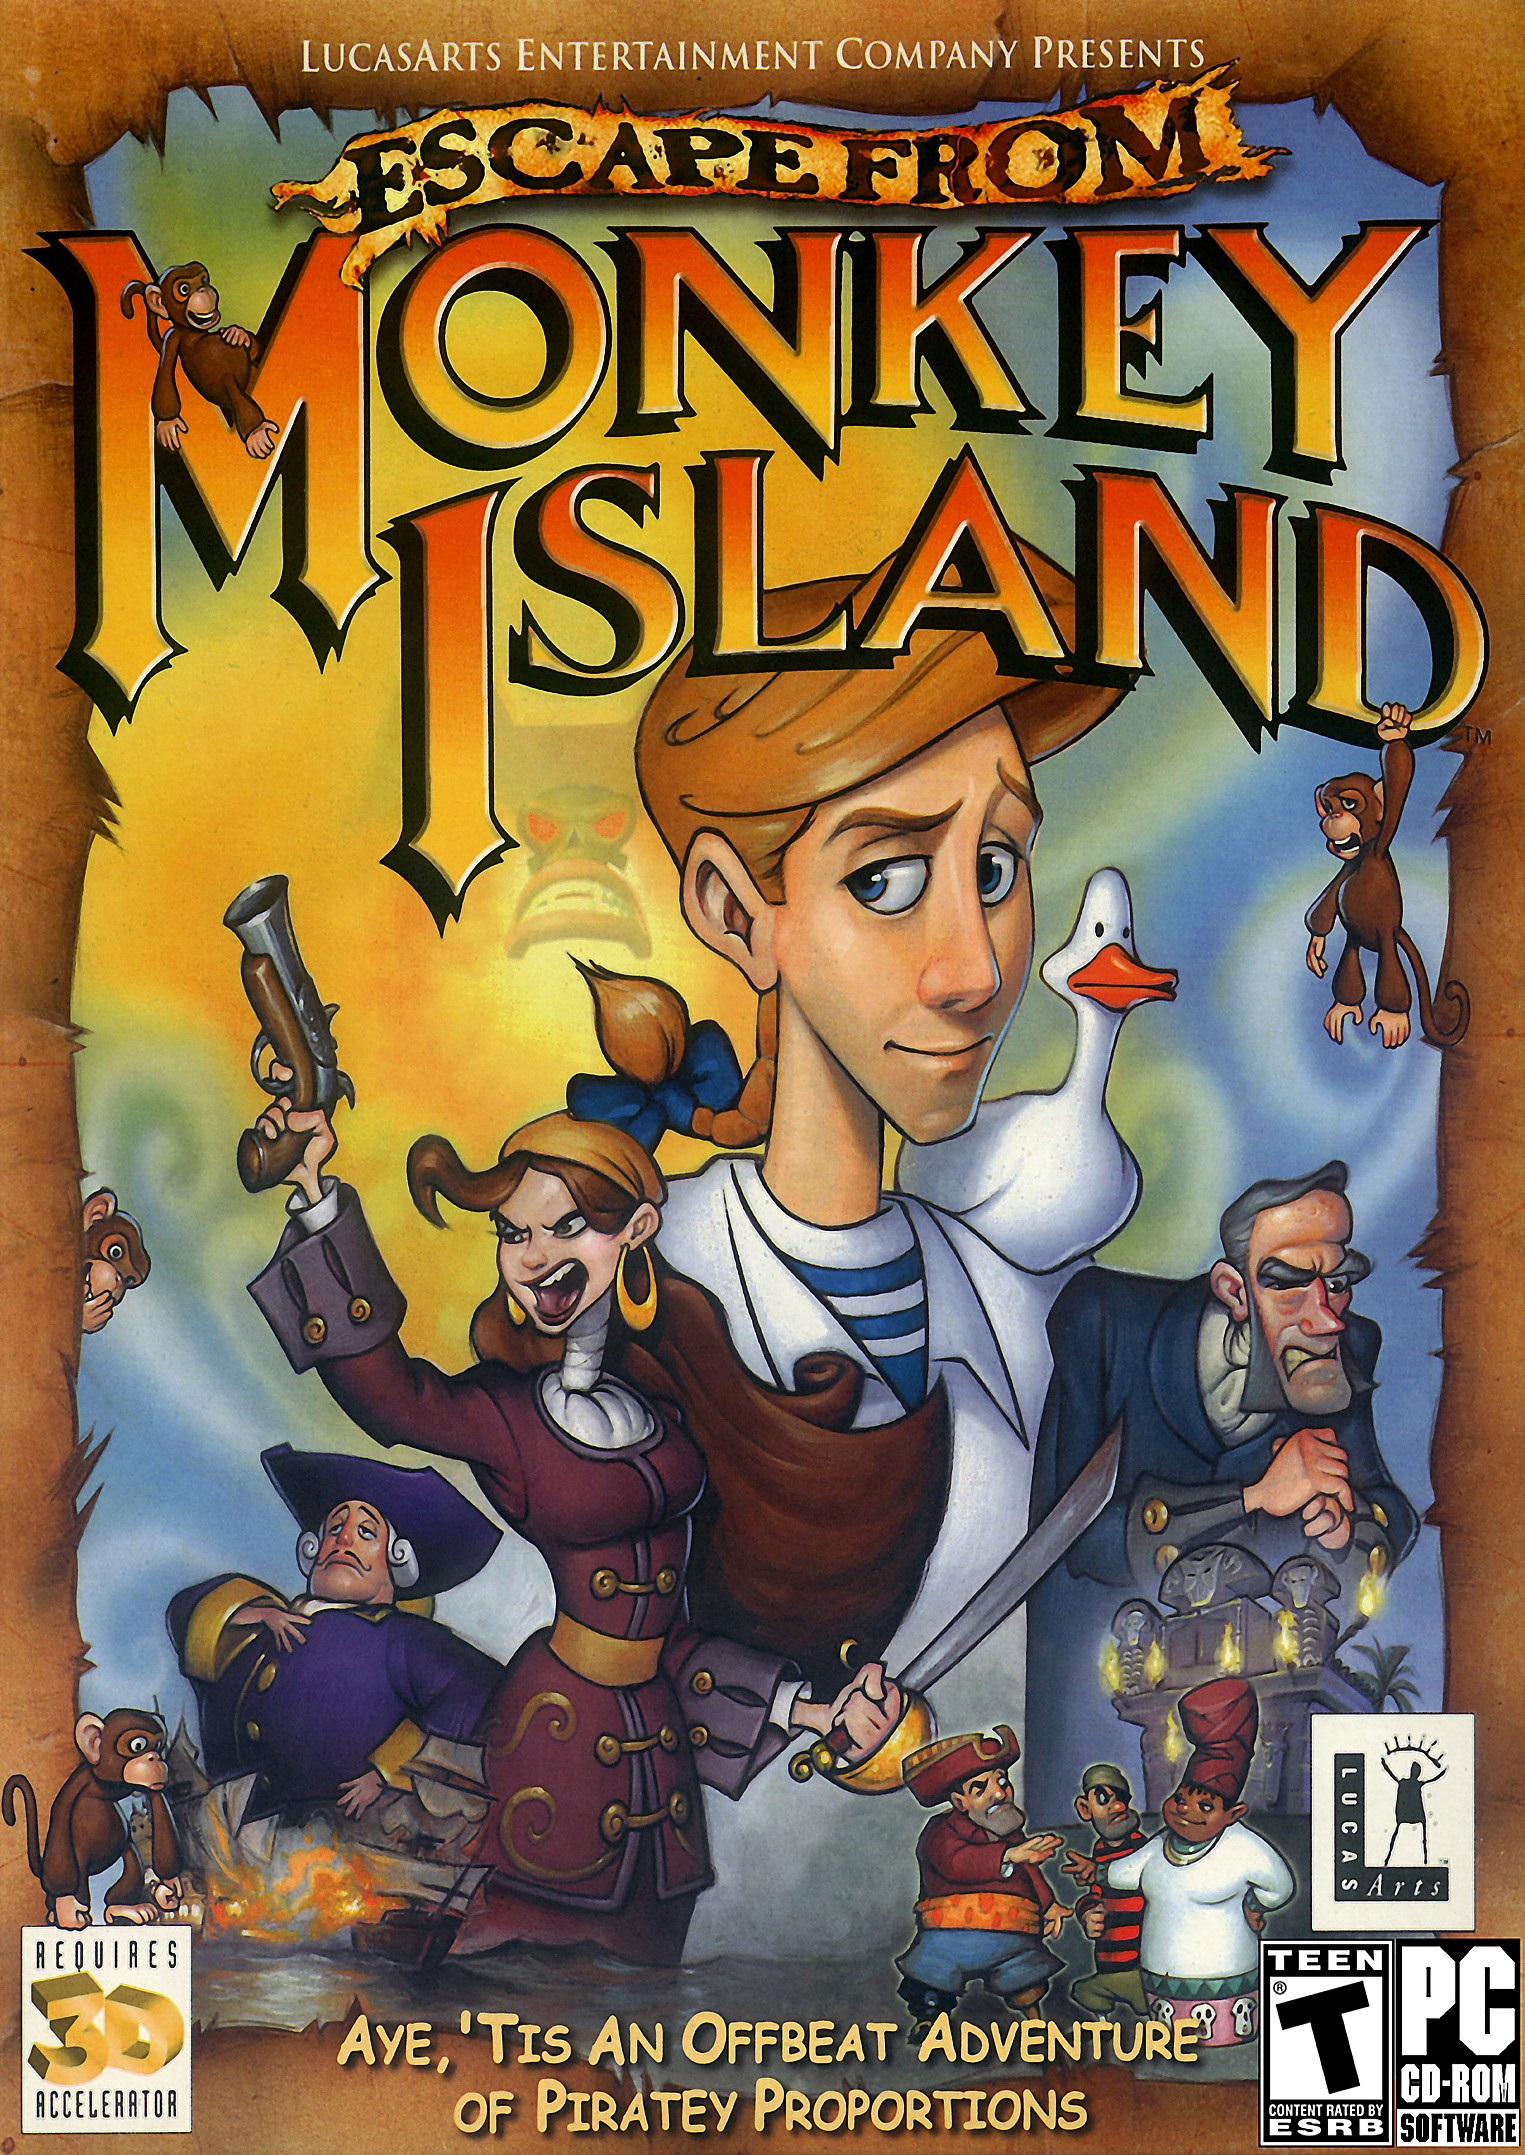 'Escape from Monkey island'